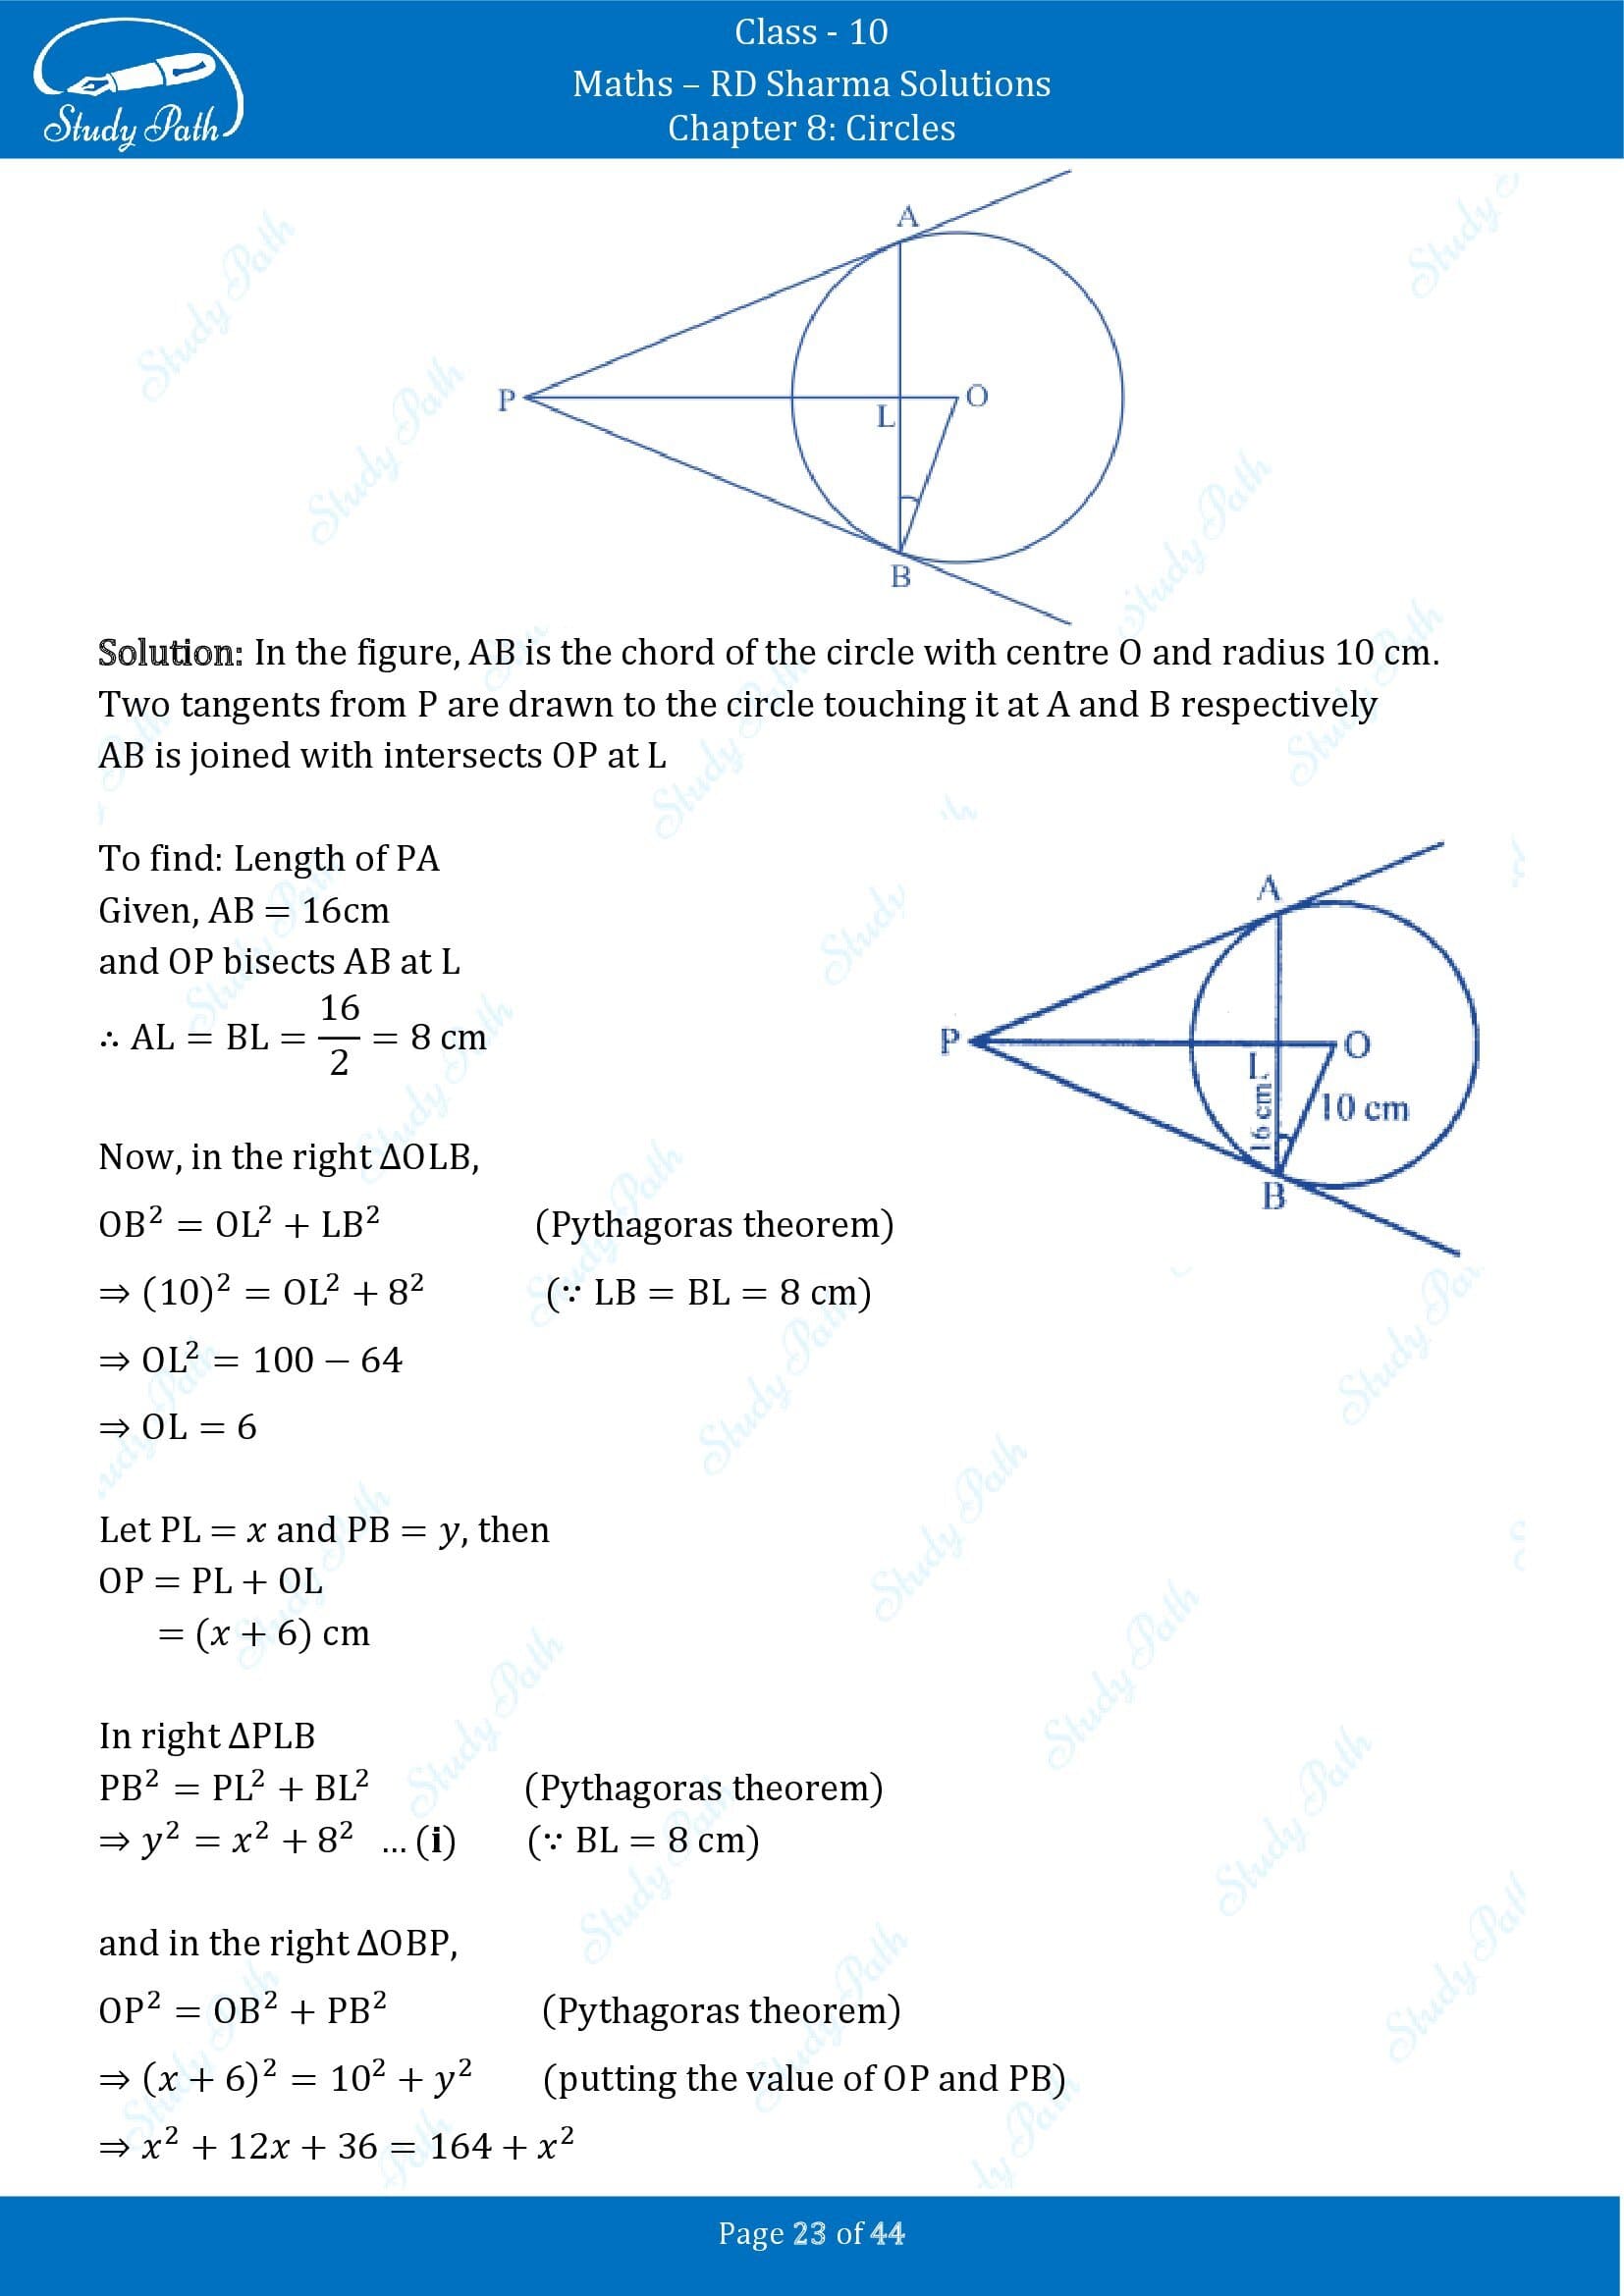 RD Sharma Solutions Class 10 Chapter 8 Circles Exercise 8.2 00023